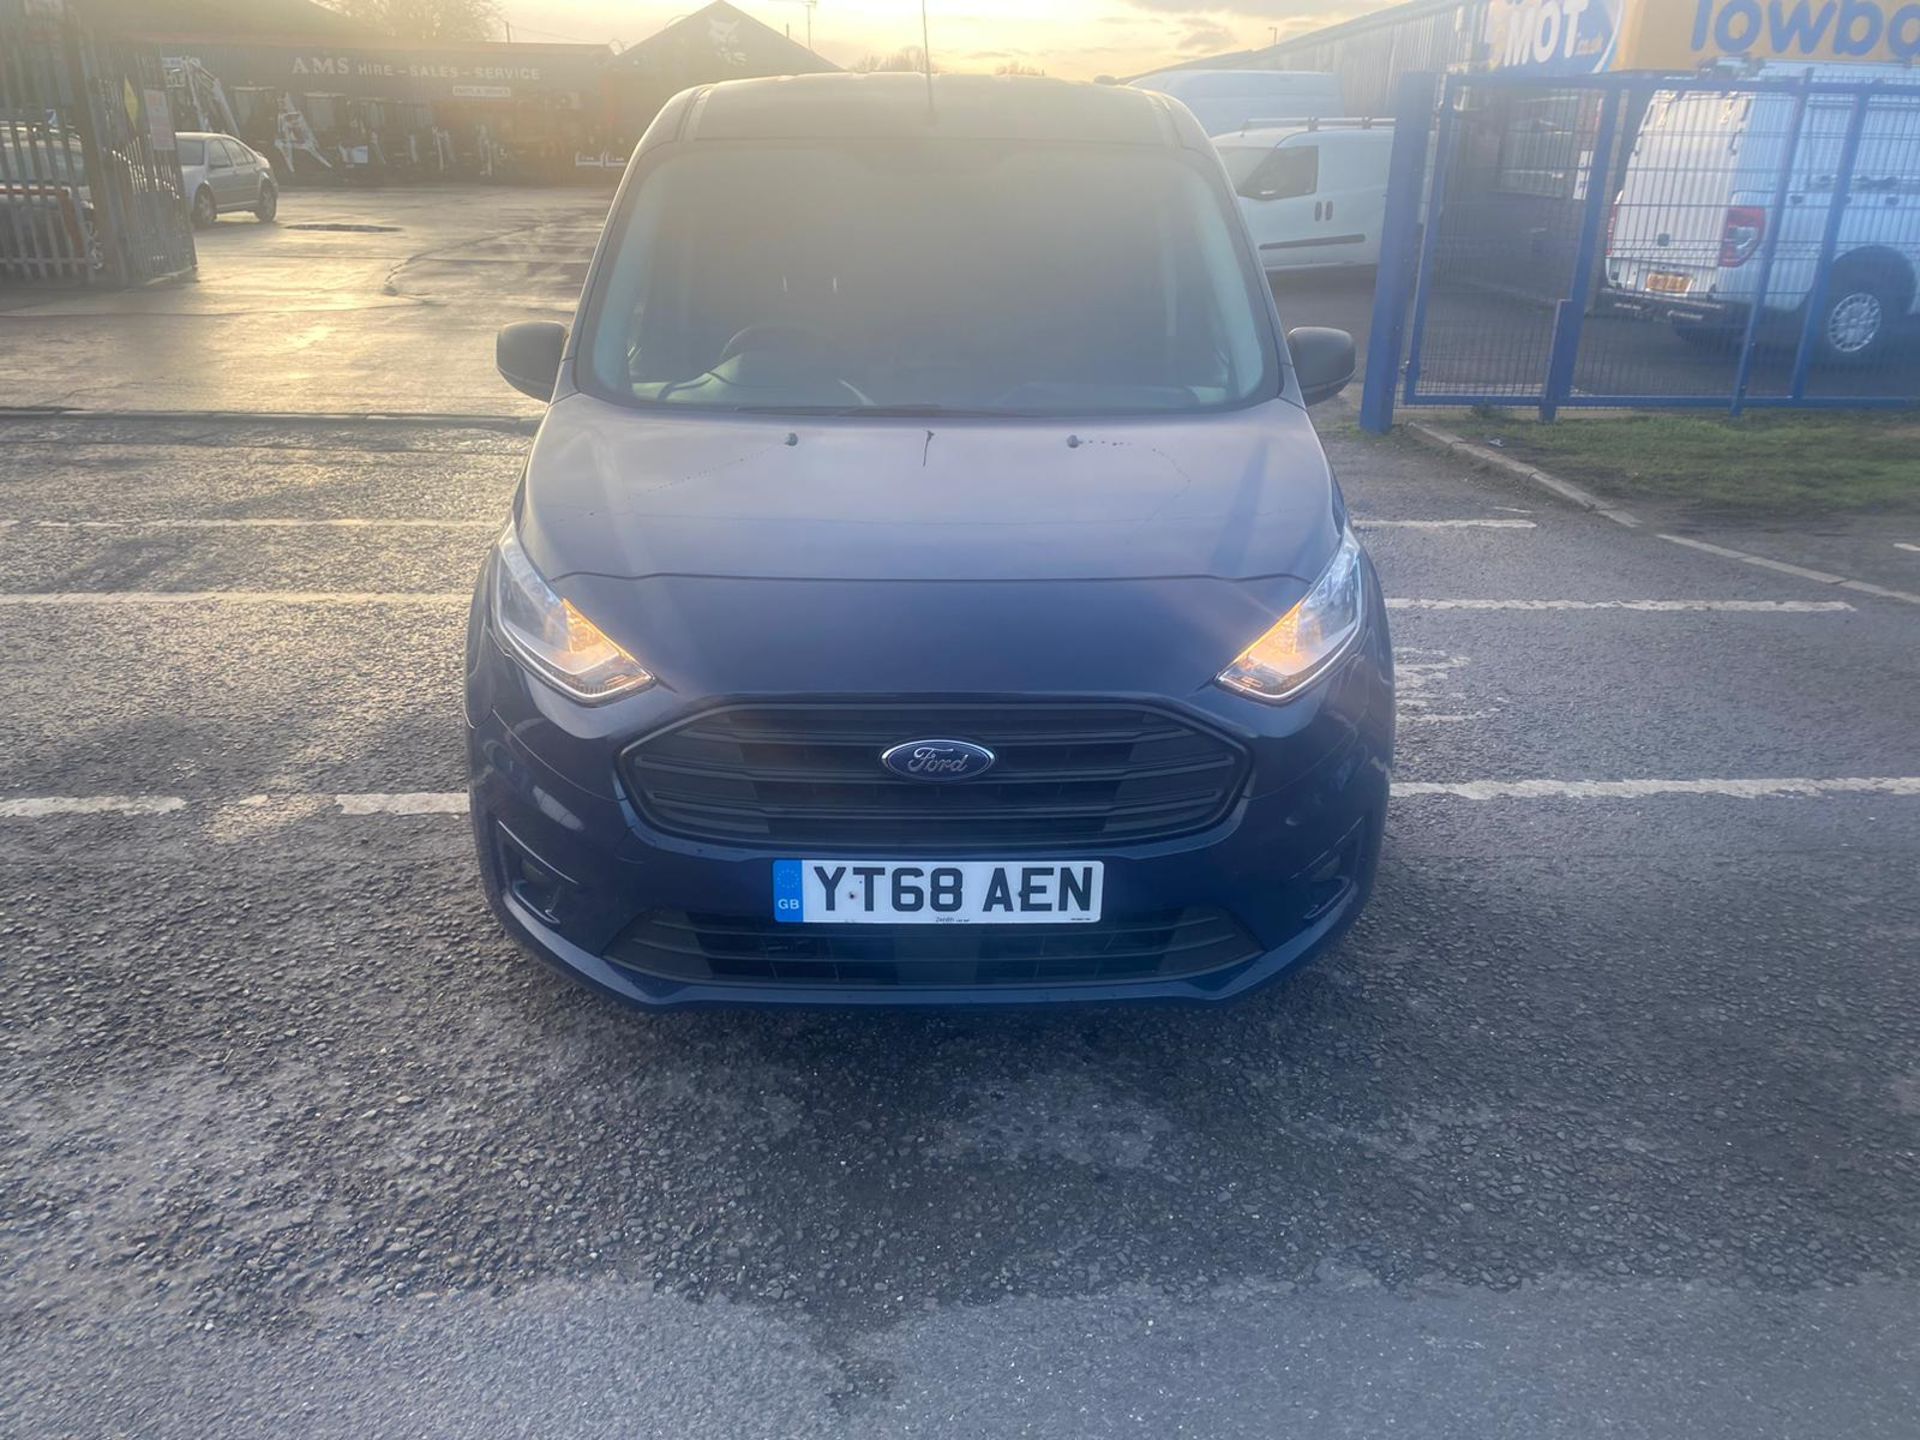 2018 68 FORD TRANSIT CONNECT TREND LWB PANEL VAN - 3 SEATS - NEWER SHAPE - AIR CON. - Image 2 of 9